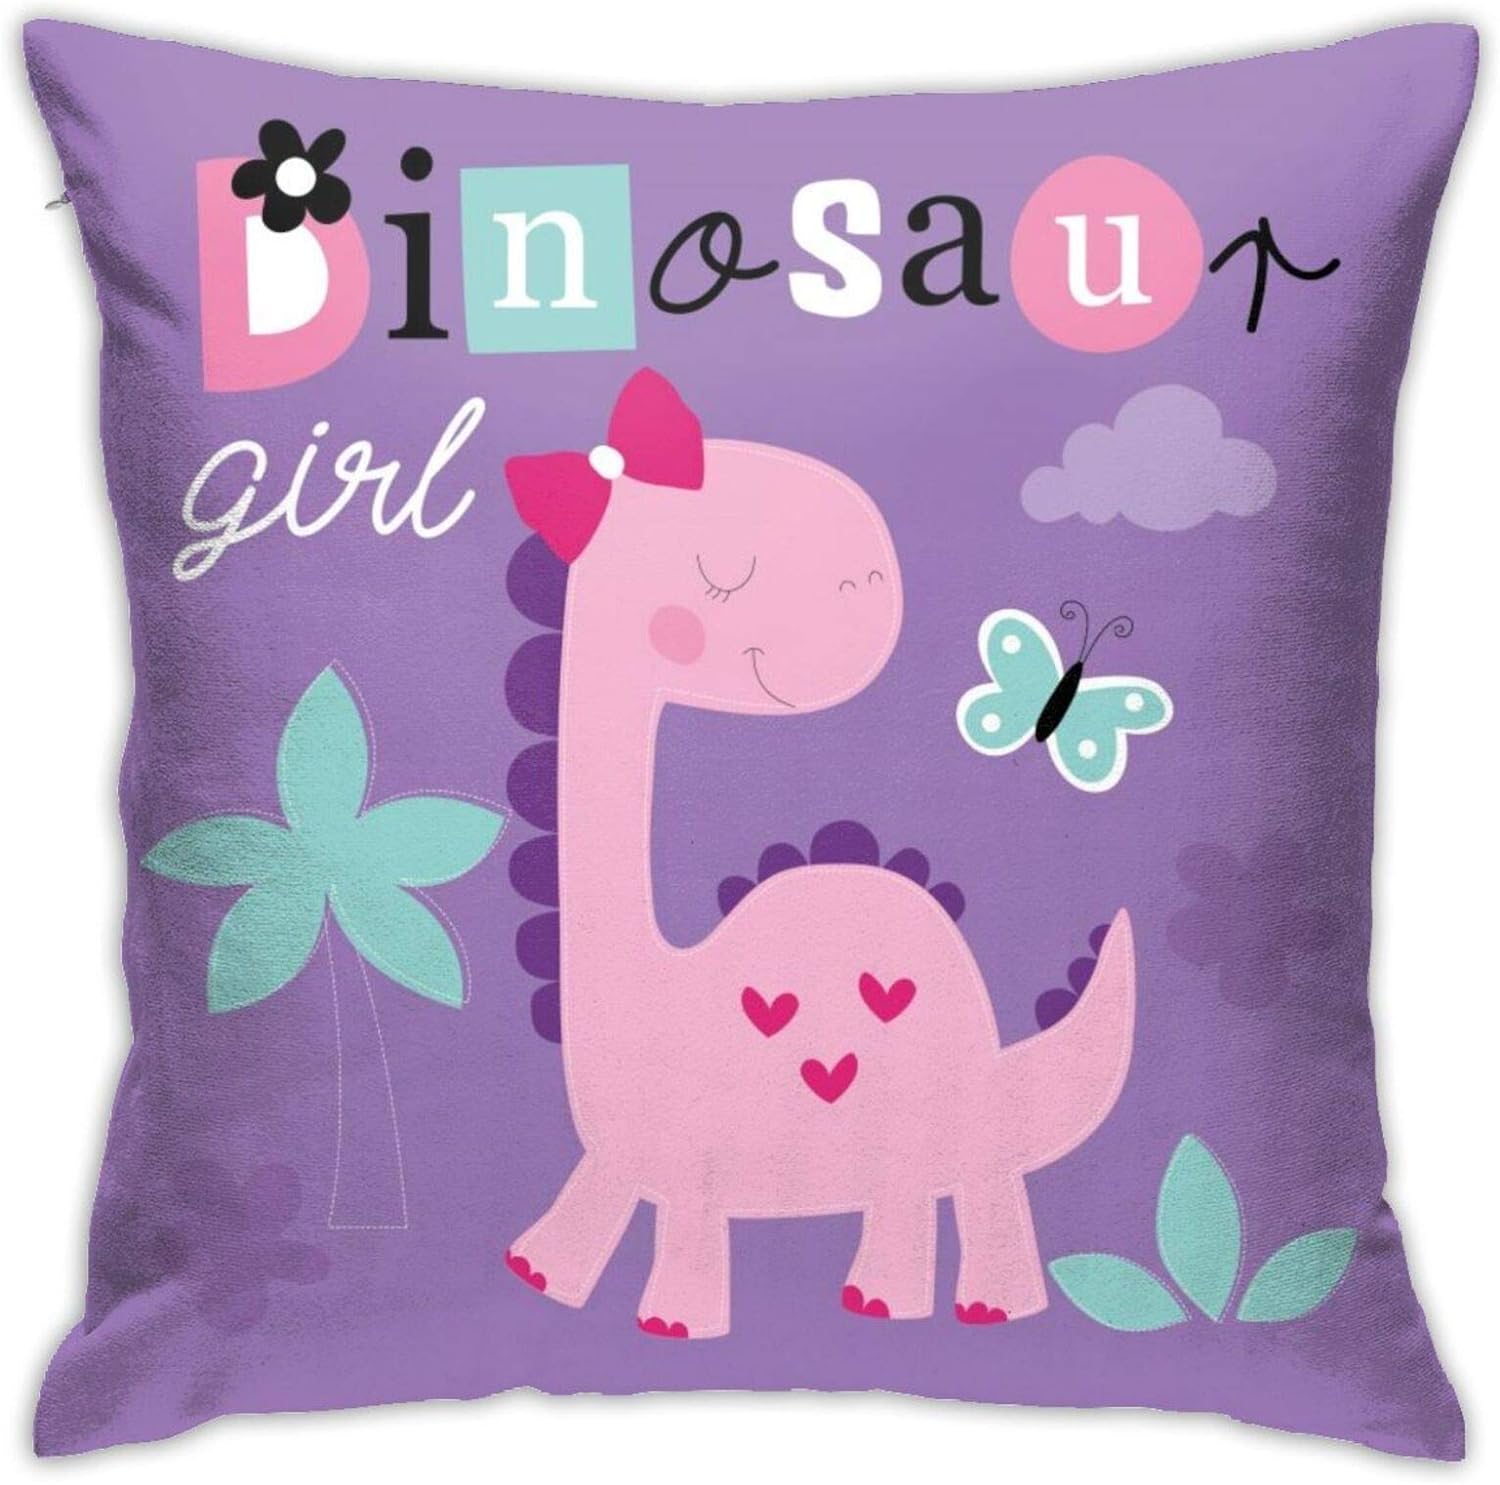 Very cute pillow case. Matches perfectly with my daughters bed set